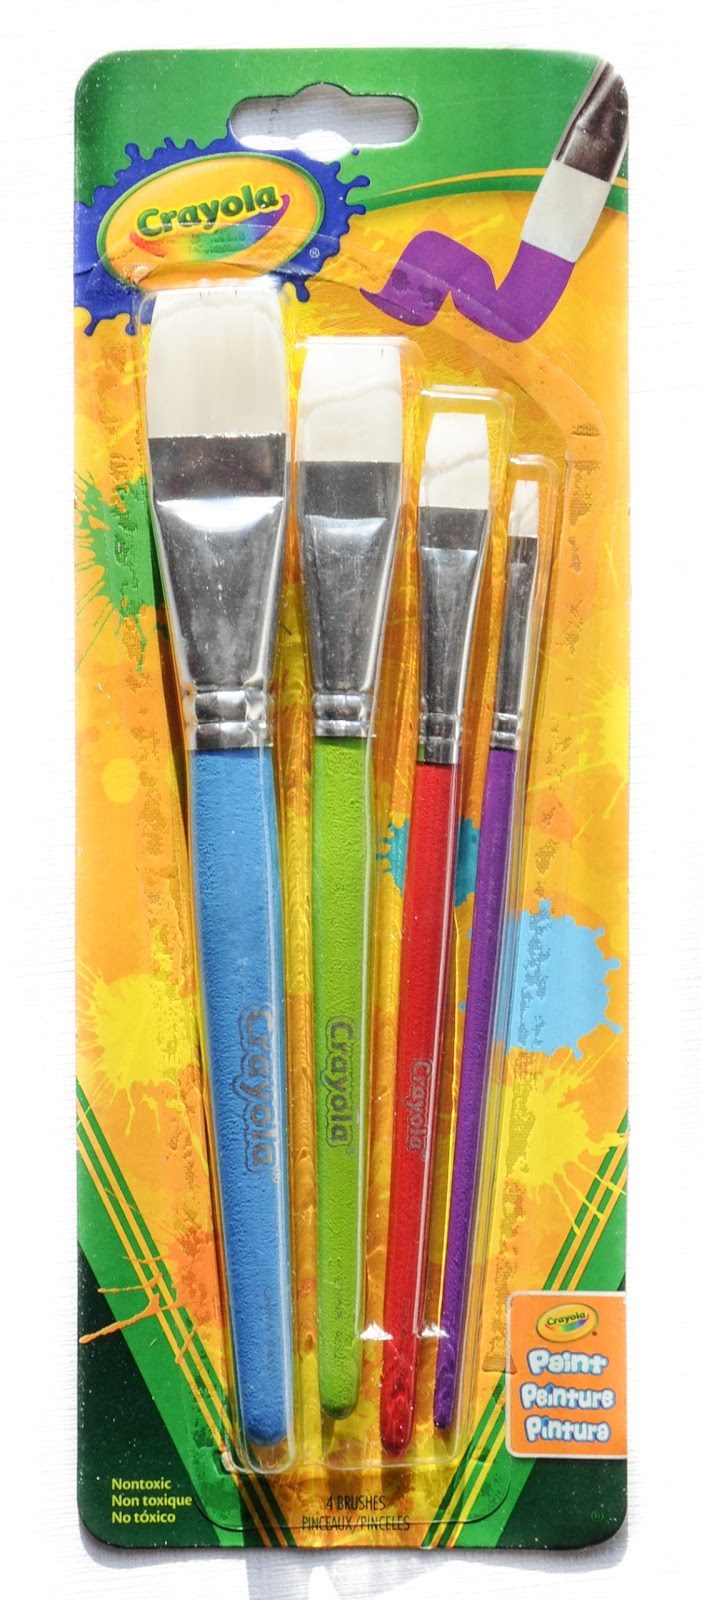 Crayola Paint Brushes: What's Inside the Box